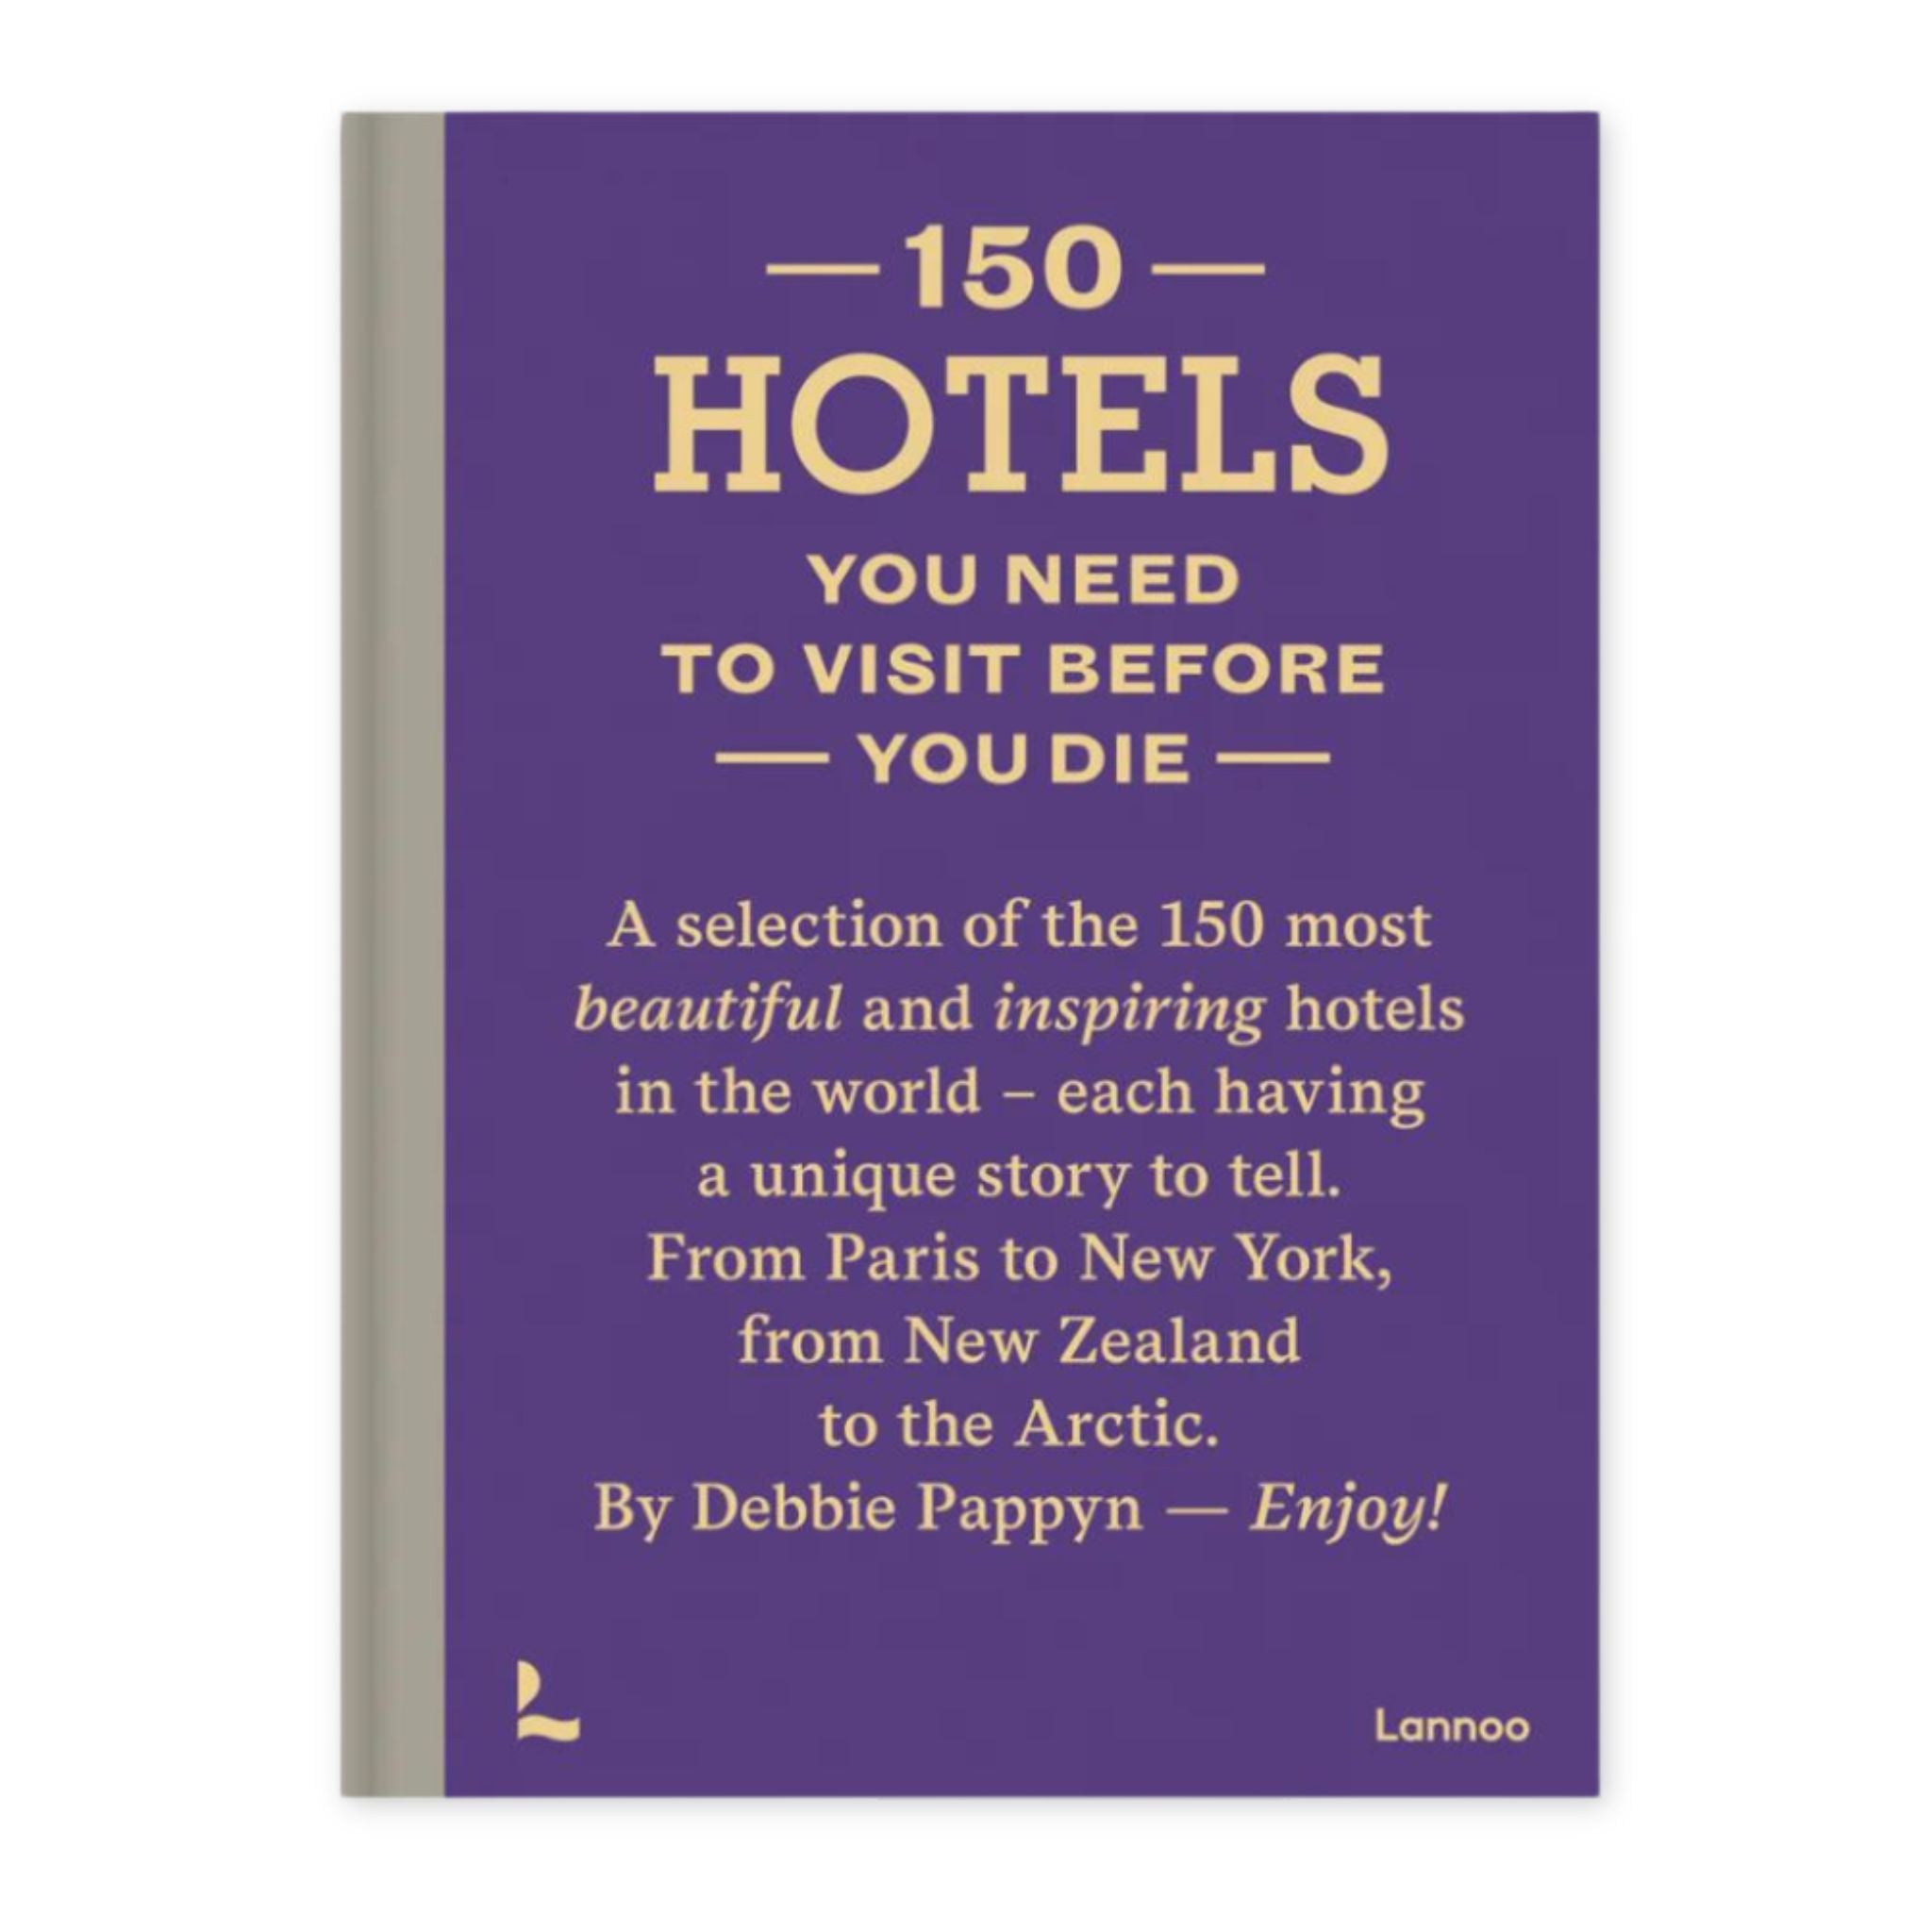 Book about 150 Best Hotels in The World